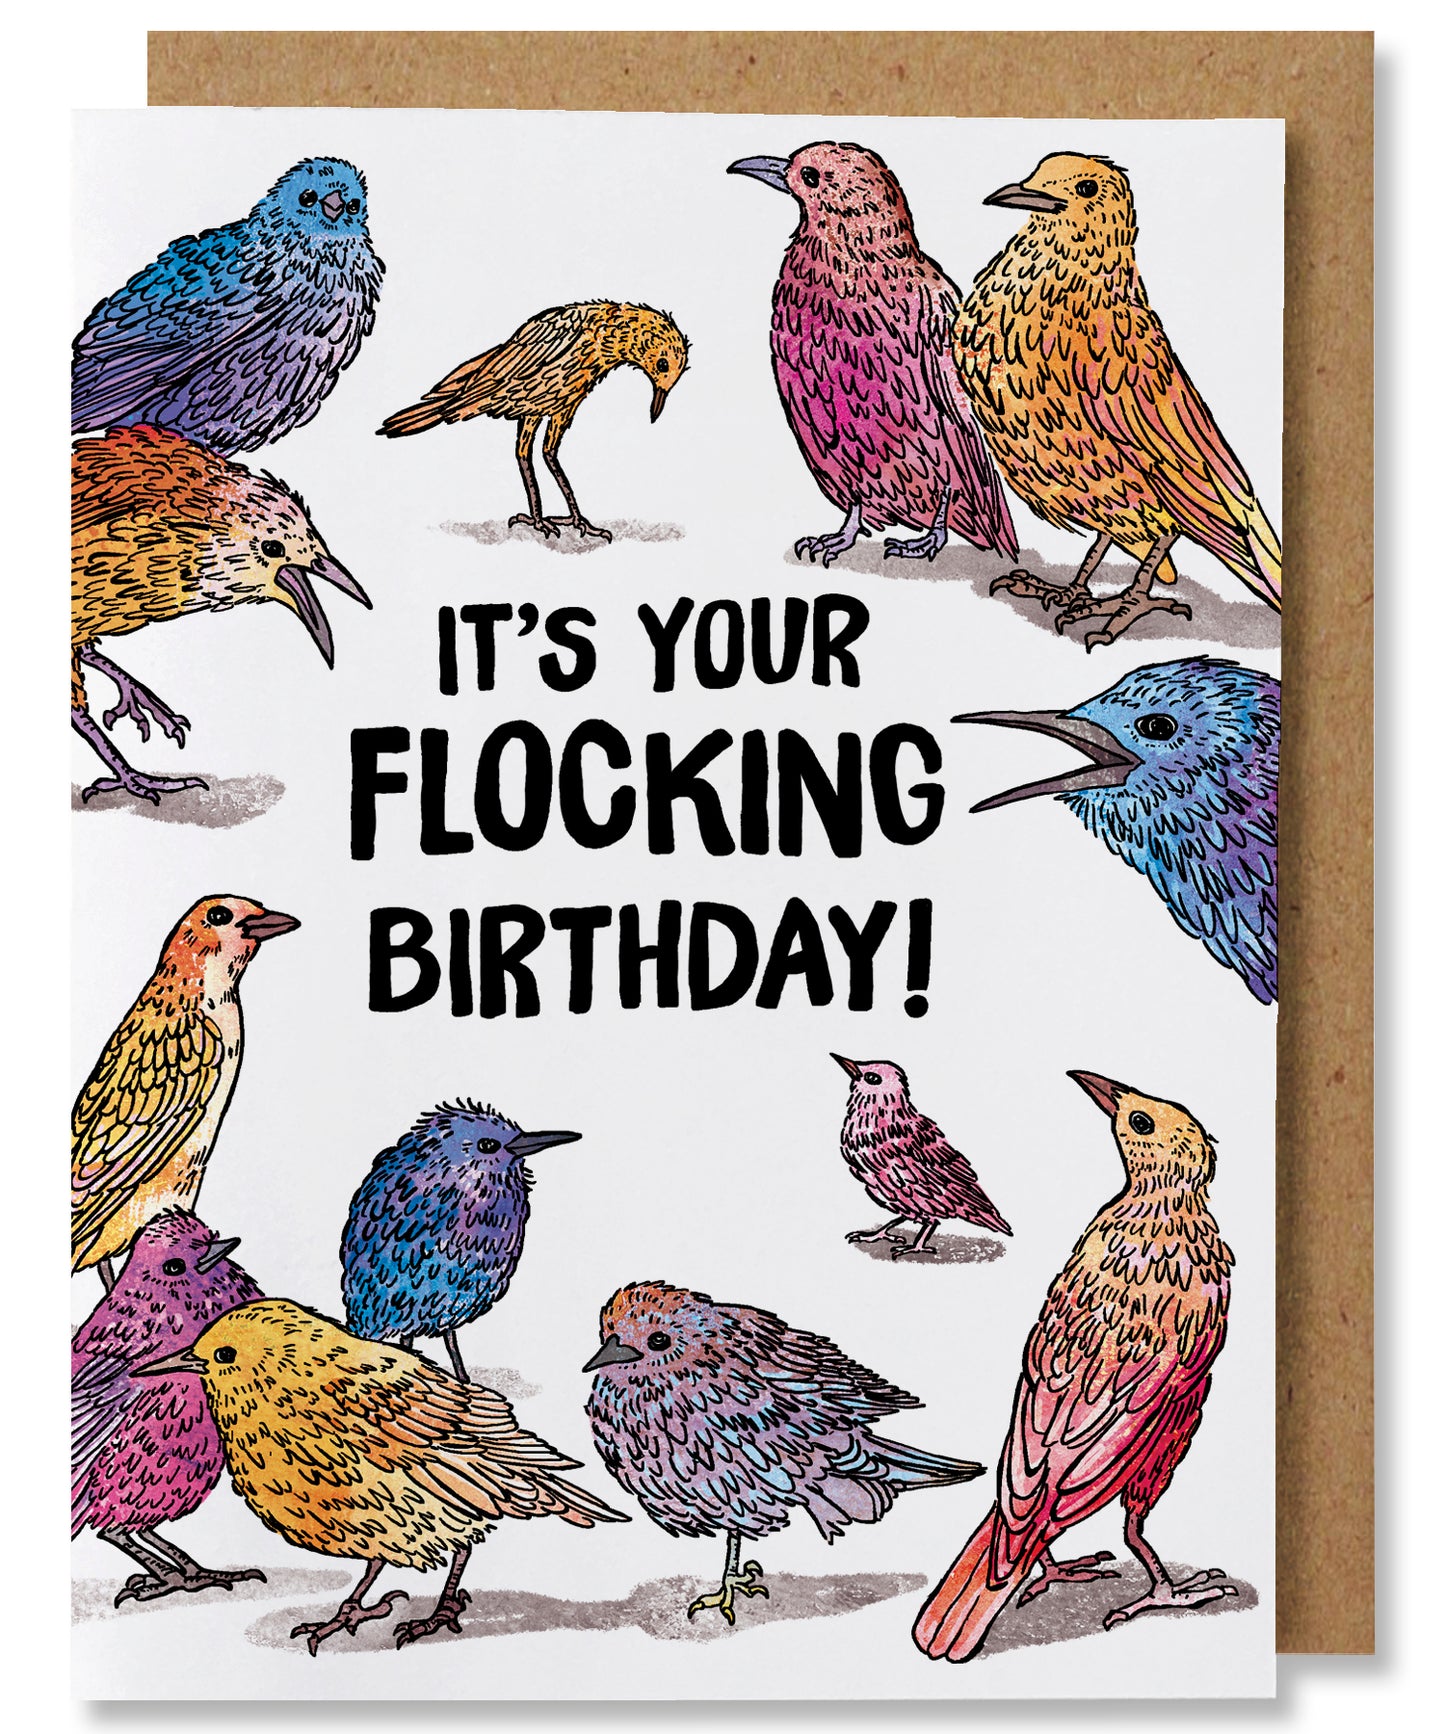 Illustrated greeting card with birds in shades of blue, yellow, pink, and red around the words “it’s your flocking birthday”.